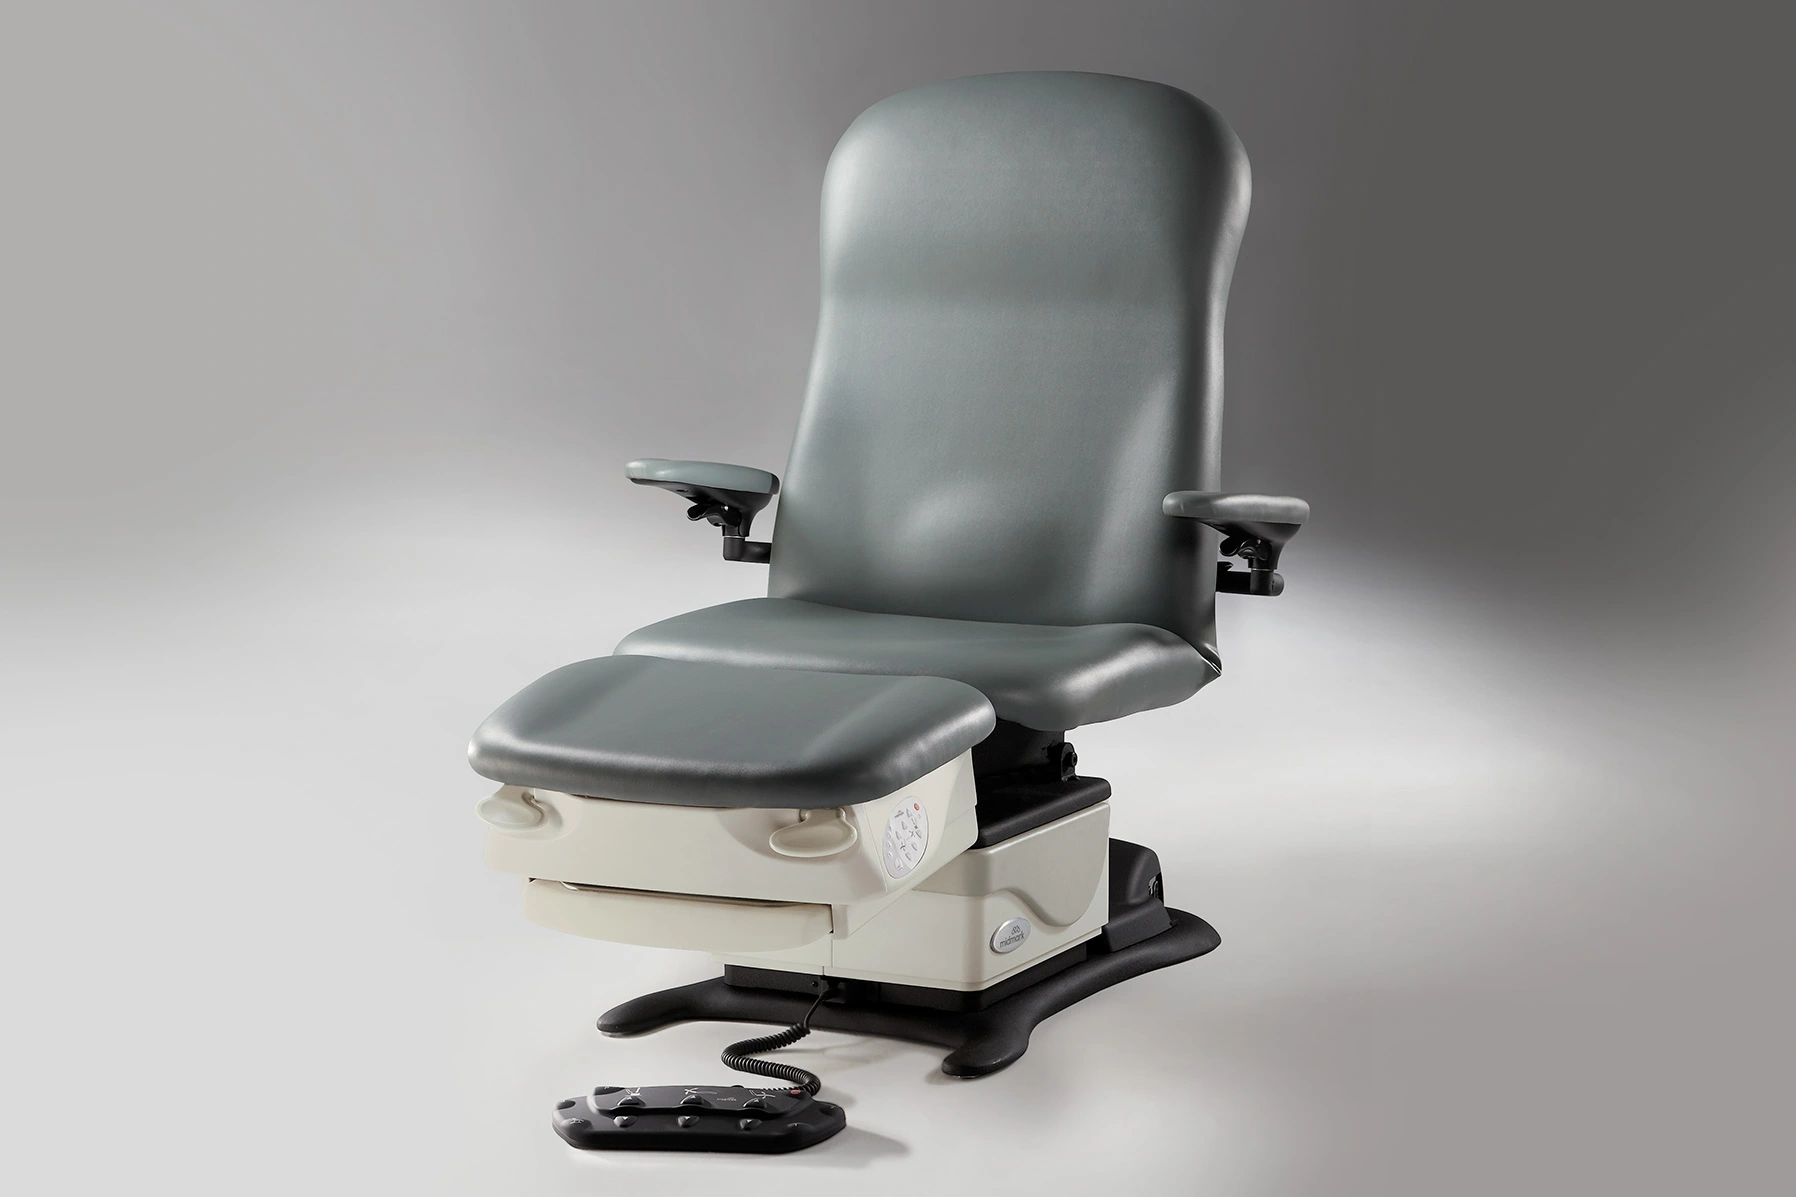 647-podiatry-chair-pic5